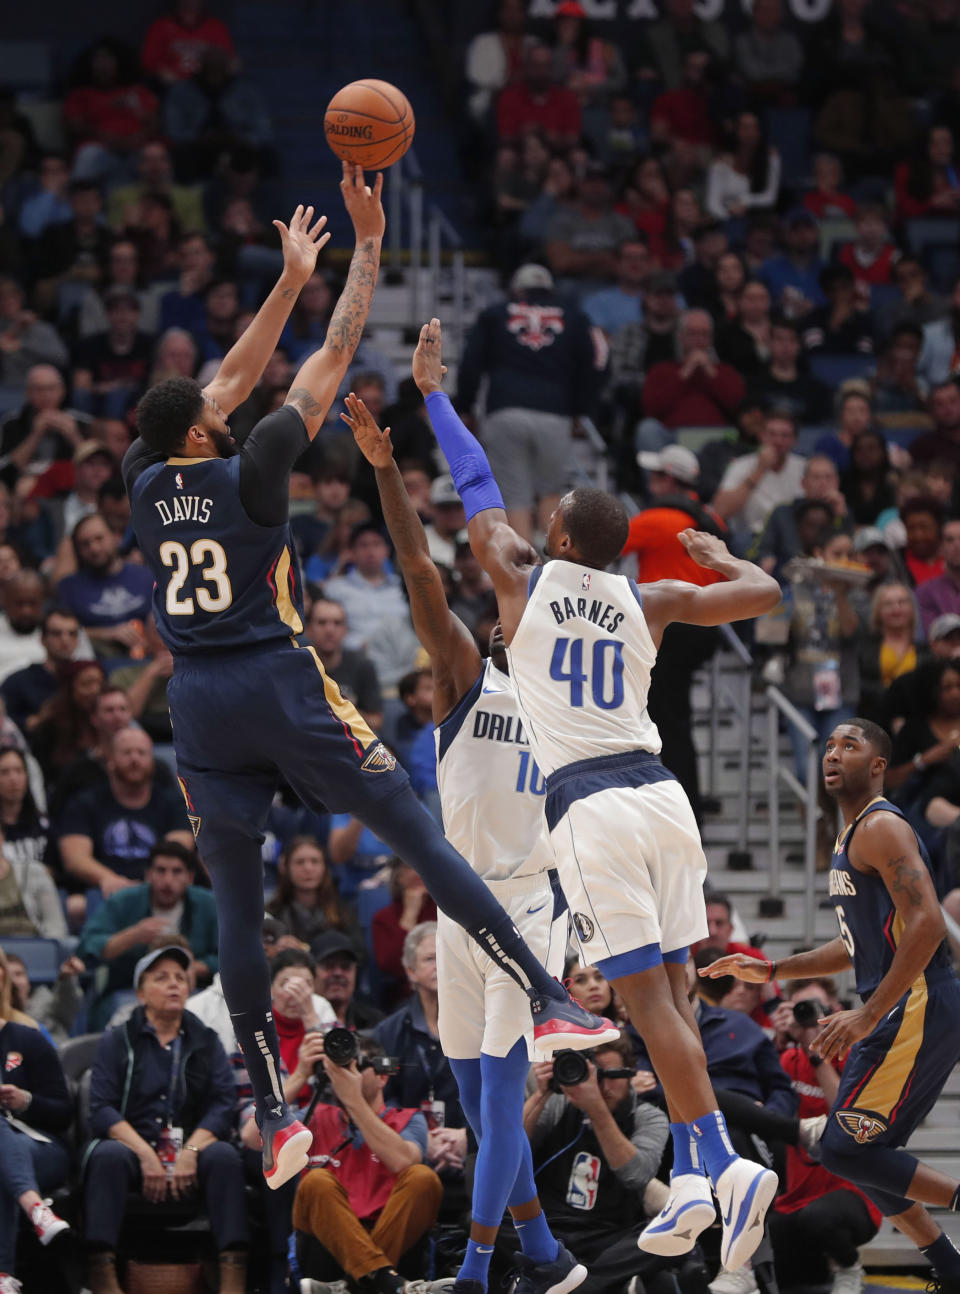 New Orleans Pelicans forward Anthony Davis (23) shoots as Dallas Mavericks forwards Dorian Finney-Smith (10) and Harrison Barnes (40) defend during the first half of an NBA basketball game in New Orleans, Friday, Dec. 28, 2018. (AP Photo/Gerald Herbert)